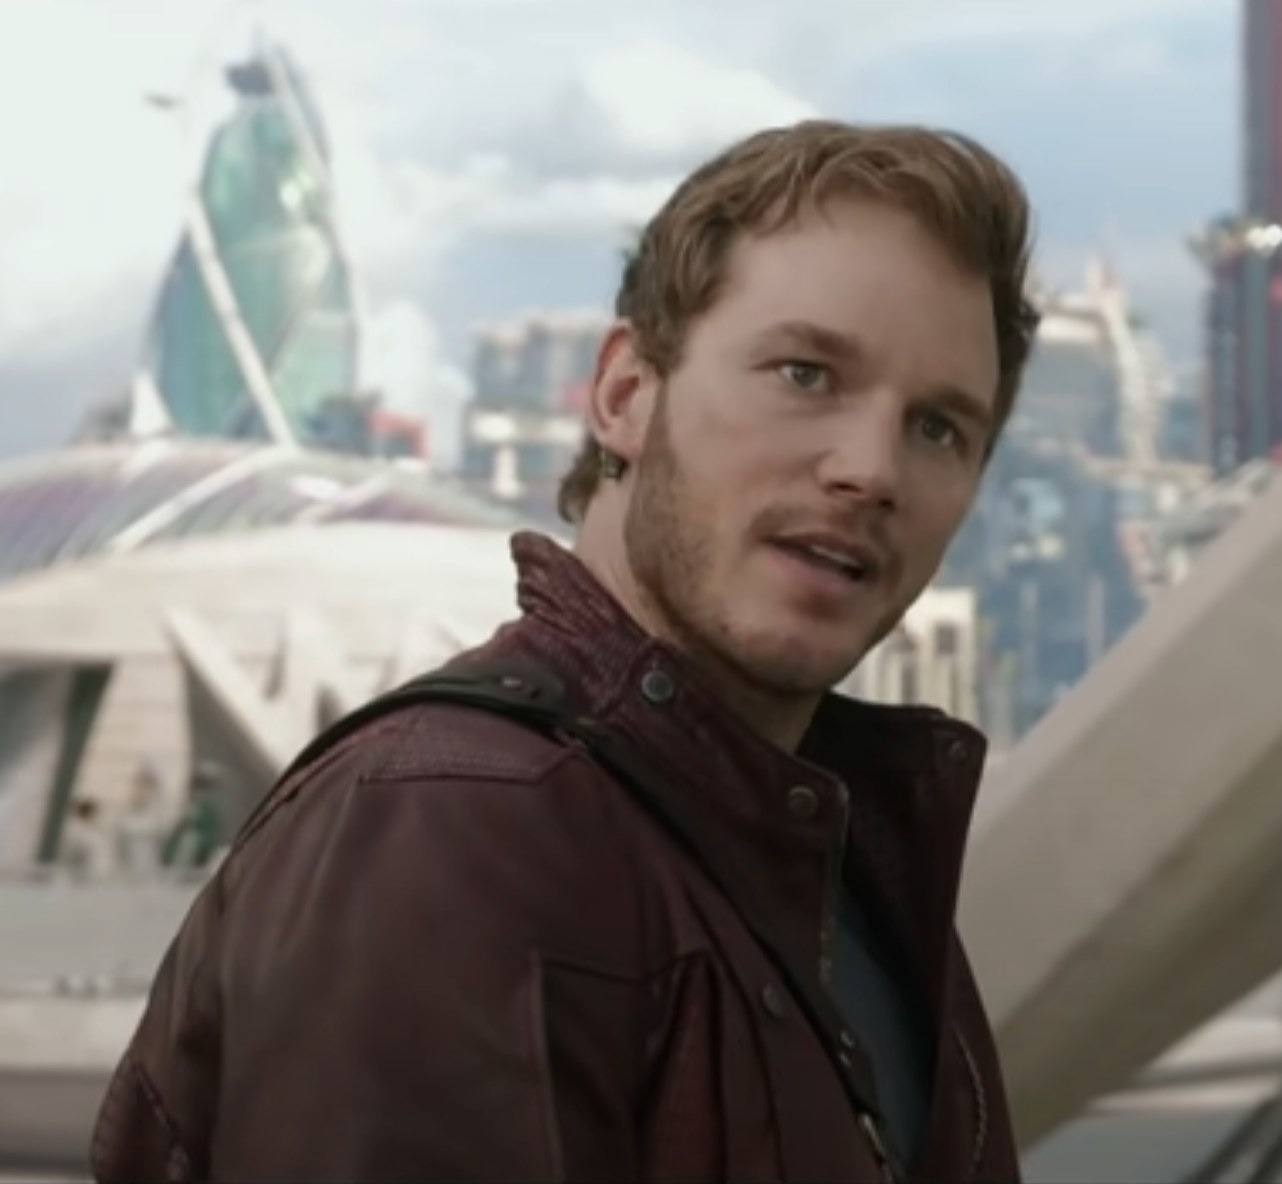 Chris Pratt as Peter Quill talks with Gamora in &quot;Guardians of the Galaxy&quot;